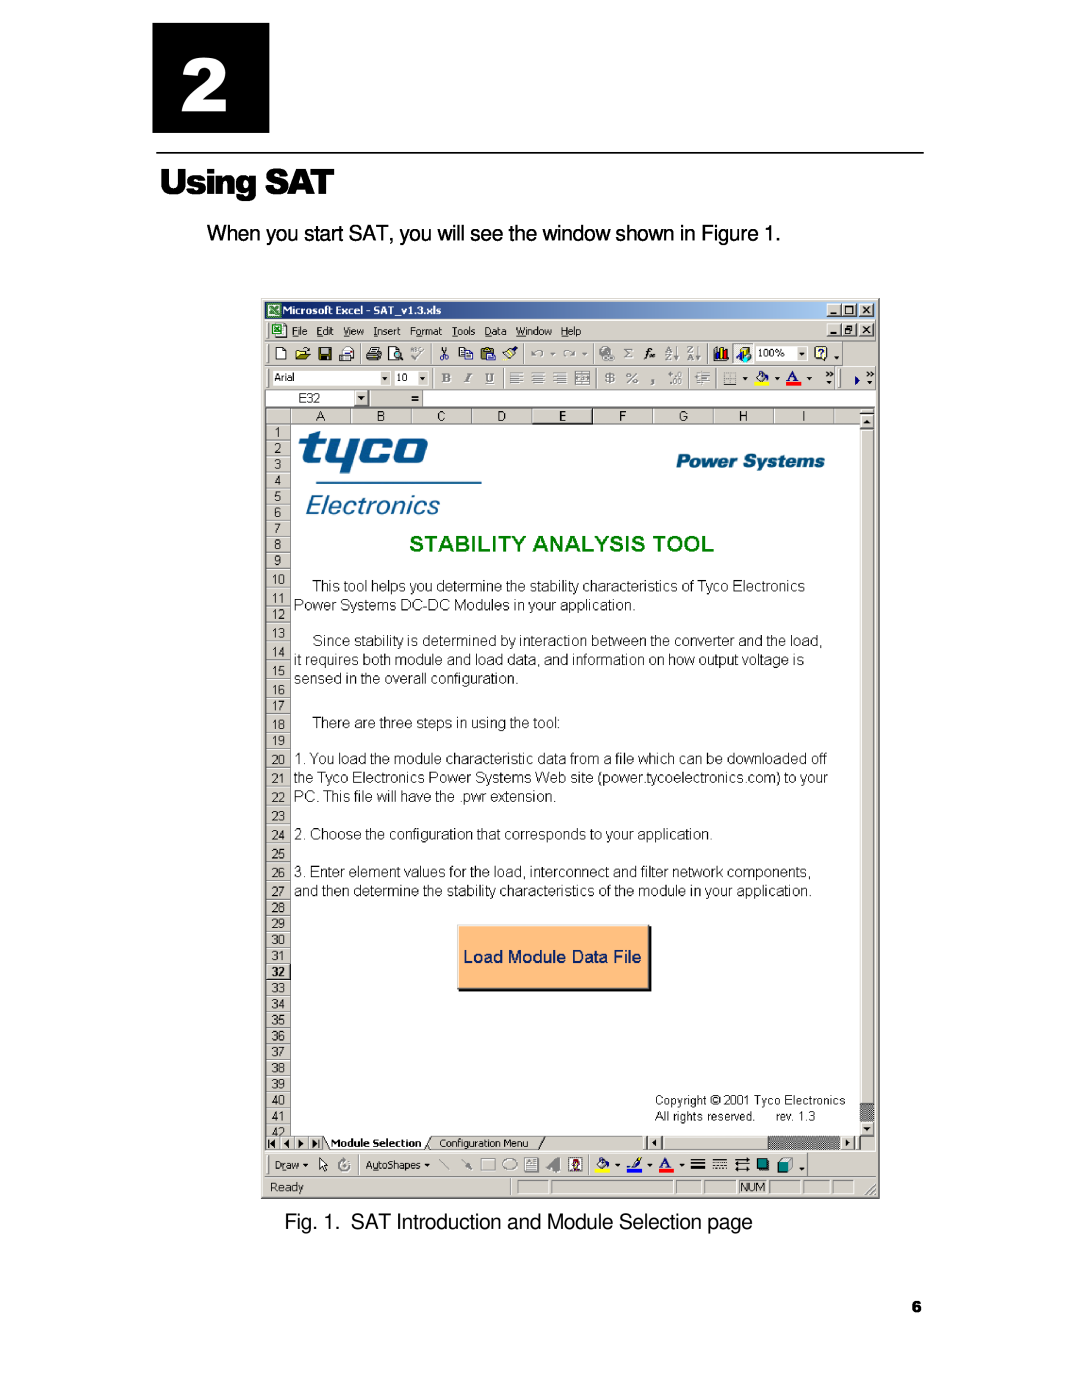 Tyco TX 75149 manual Using SAT, When you start SAT, you will see the window shown in Figure 